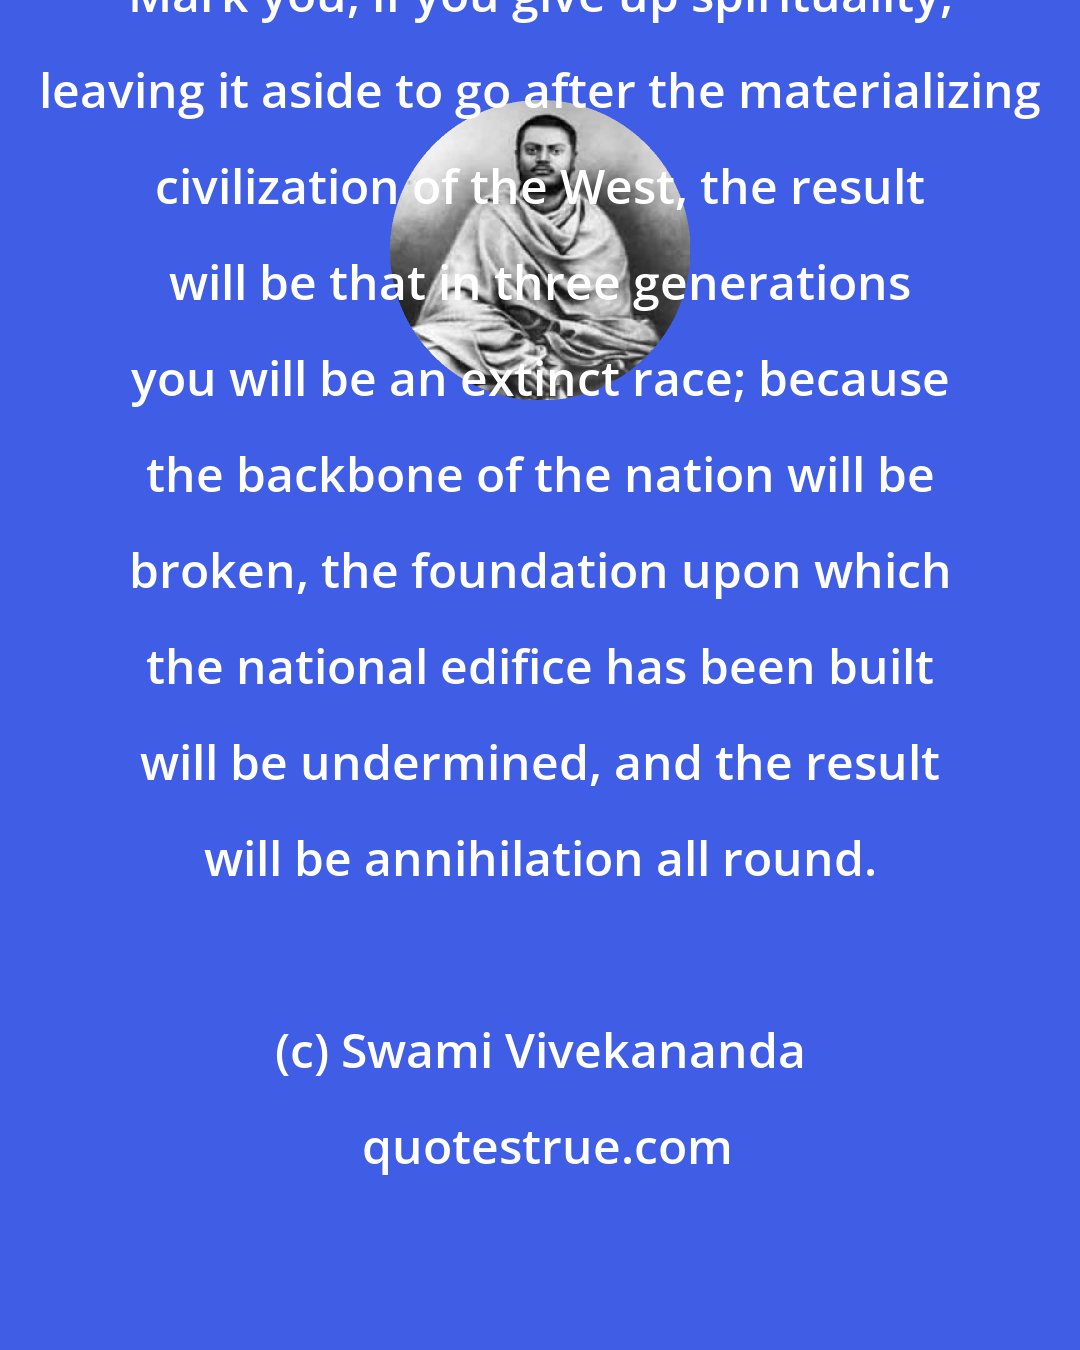 Swami Vivekananda: Mark you, if you give up spirituality, leaving it aside to go after the materializing civilization of the West, the result will be that in three generations you will be an extinct race; because the backbone of the nation will be broken, the foundation upon which the national edifice has been built will be undermined, and the result will be annihilation all round.